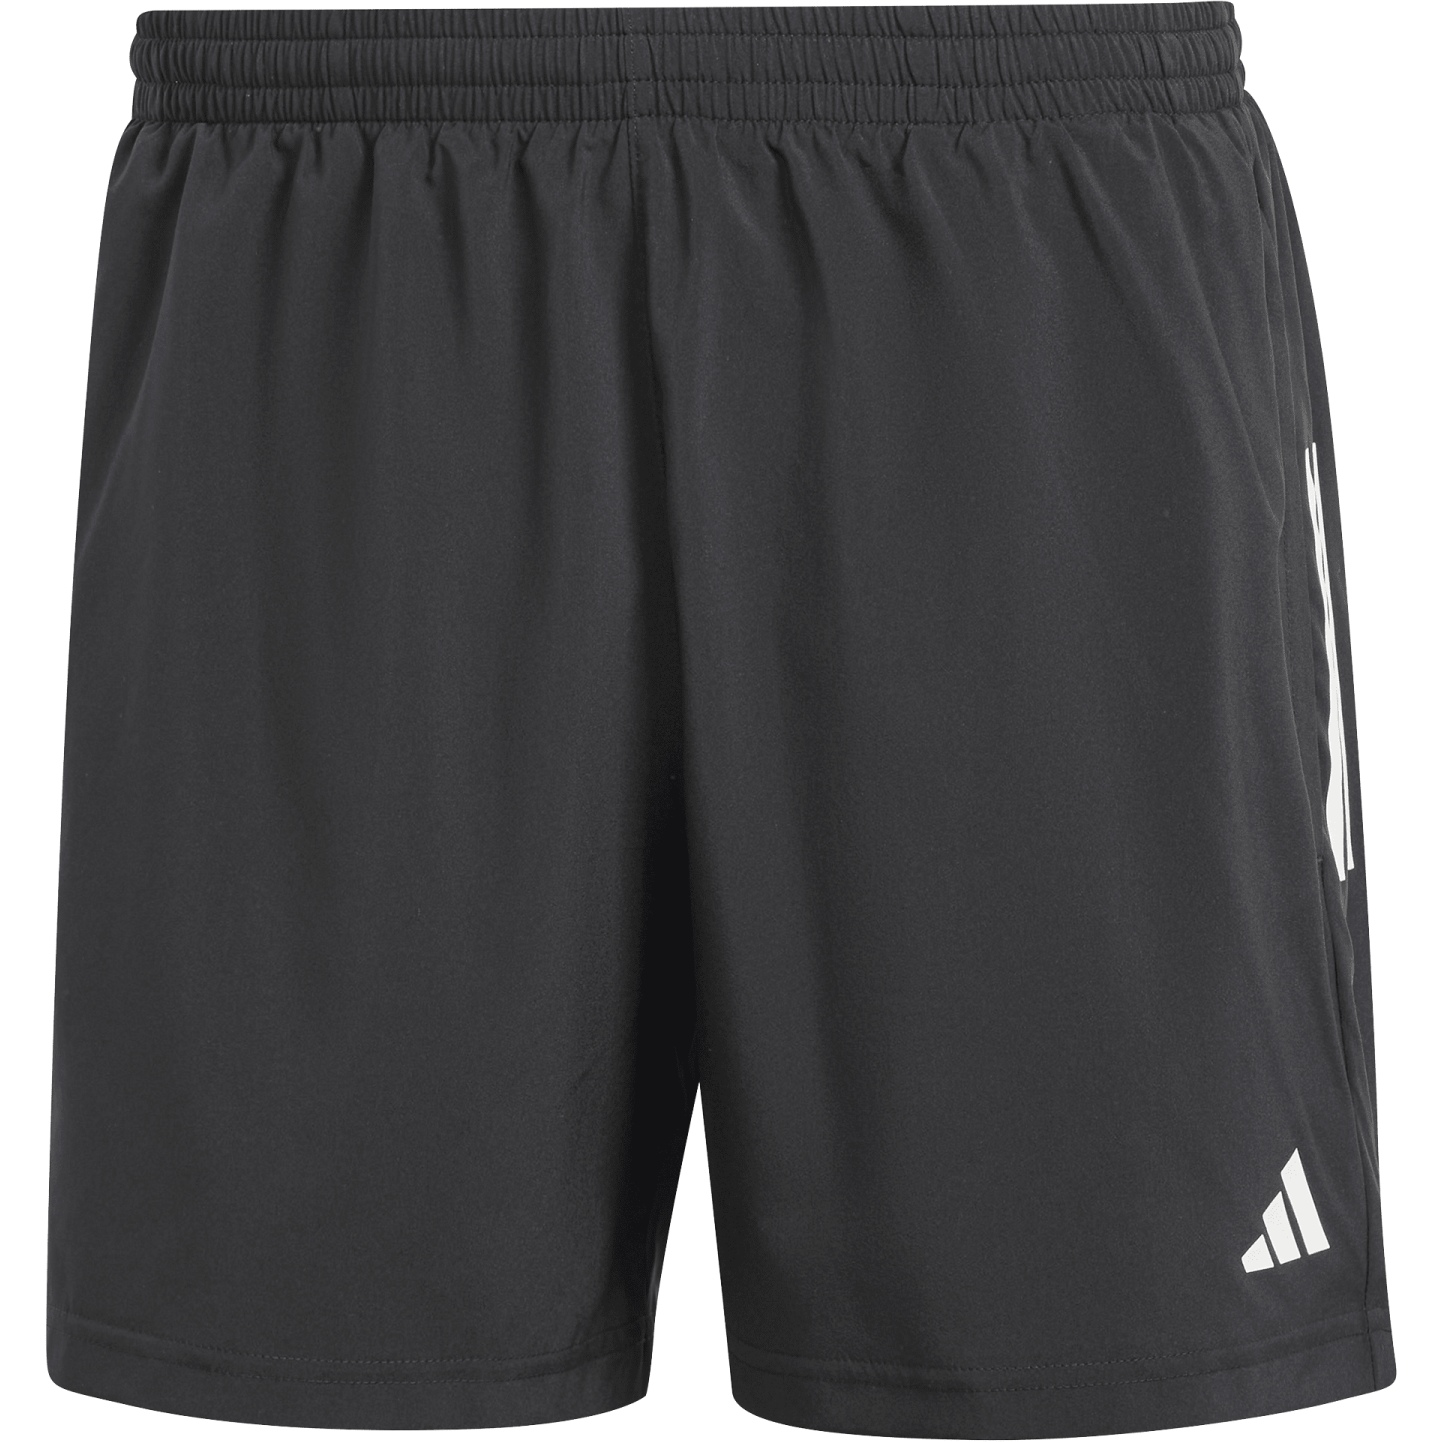 Picture of adidas Own the Run Shorts Men - black IY0704